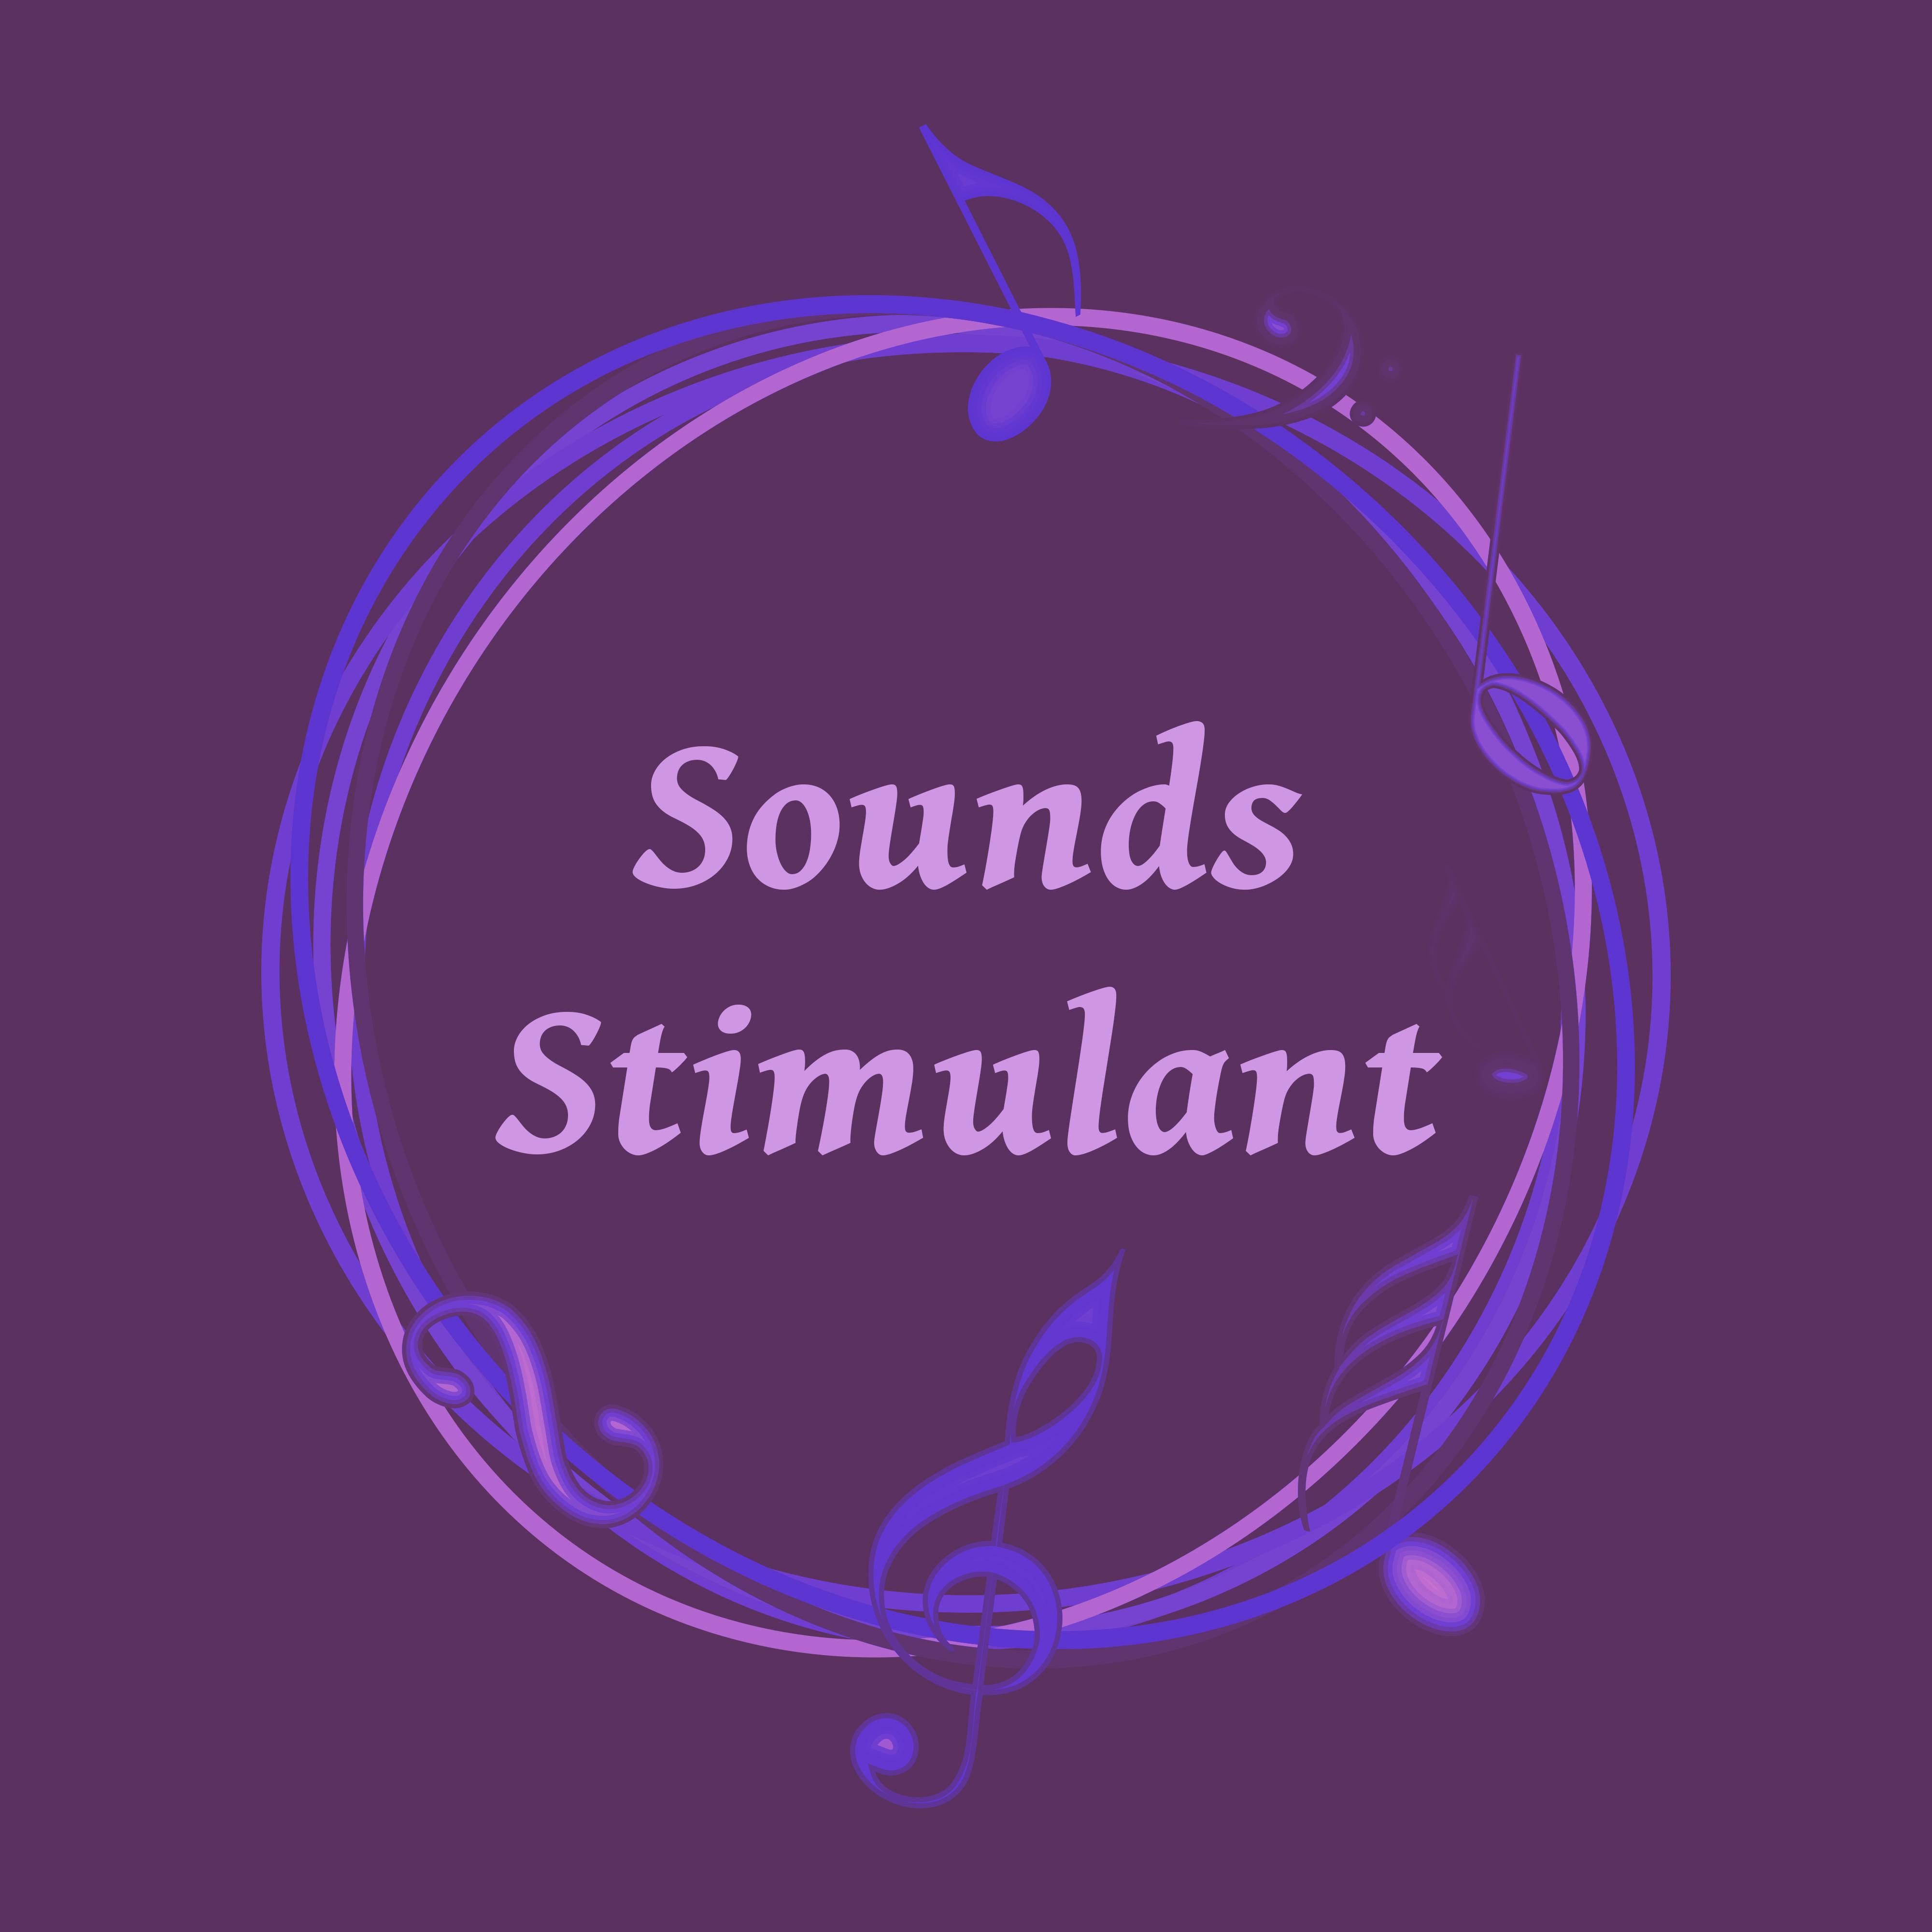 Sounds Stimulant - Tranquil Morning, Wonderful Music, Melodious Rhythms, Cool Tracks, Nice Beginning of Day